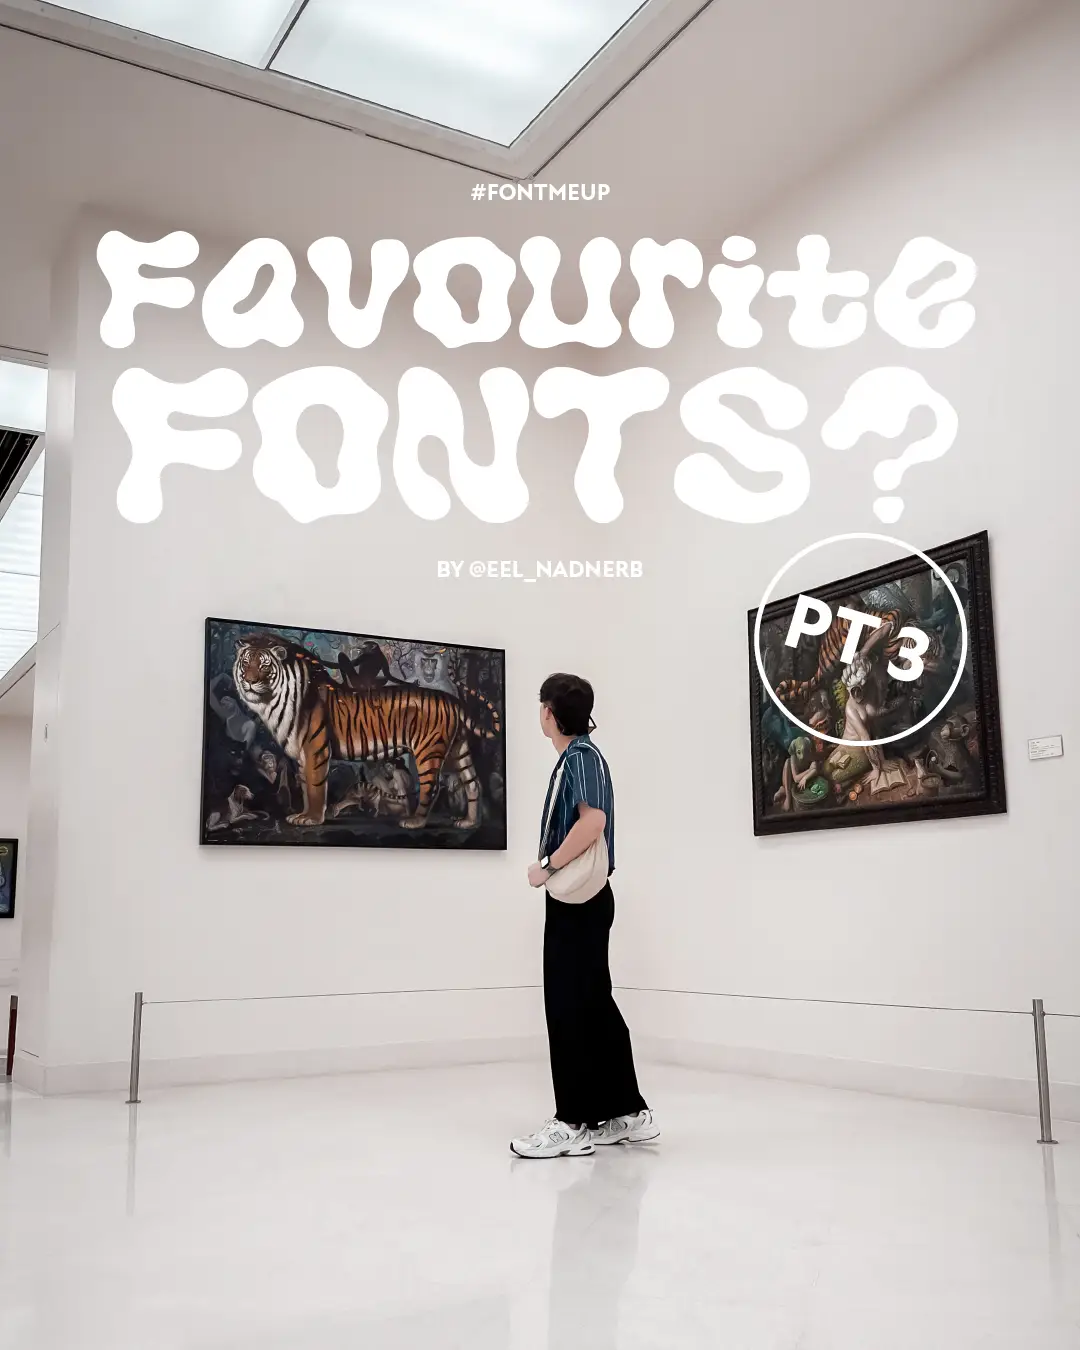 MUST-HAVE font designs that are TO DIE FOR PT 3 👨🏻‍🎨🗯️'s images(0)